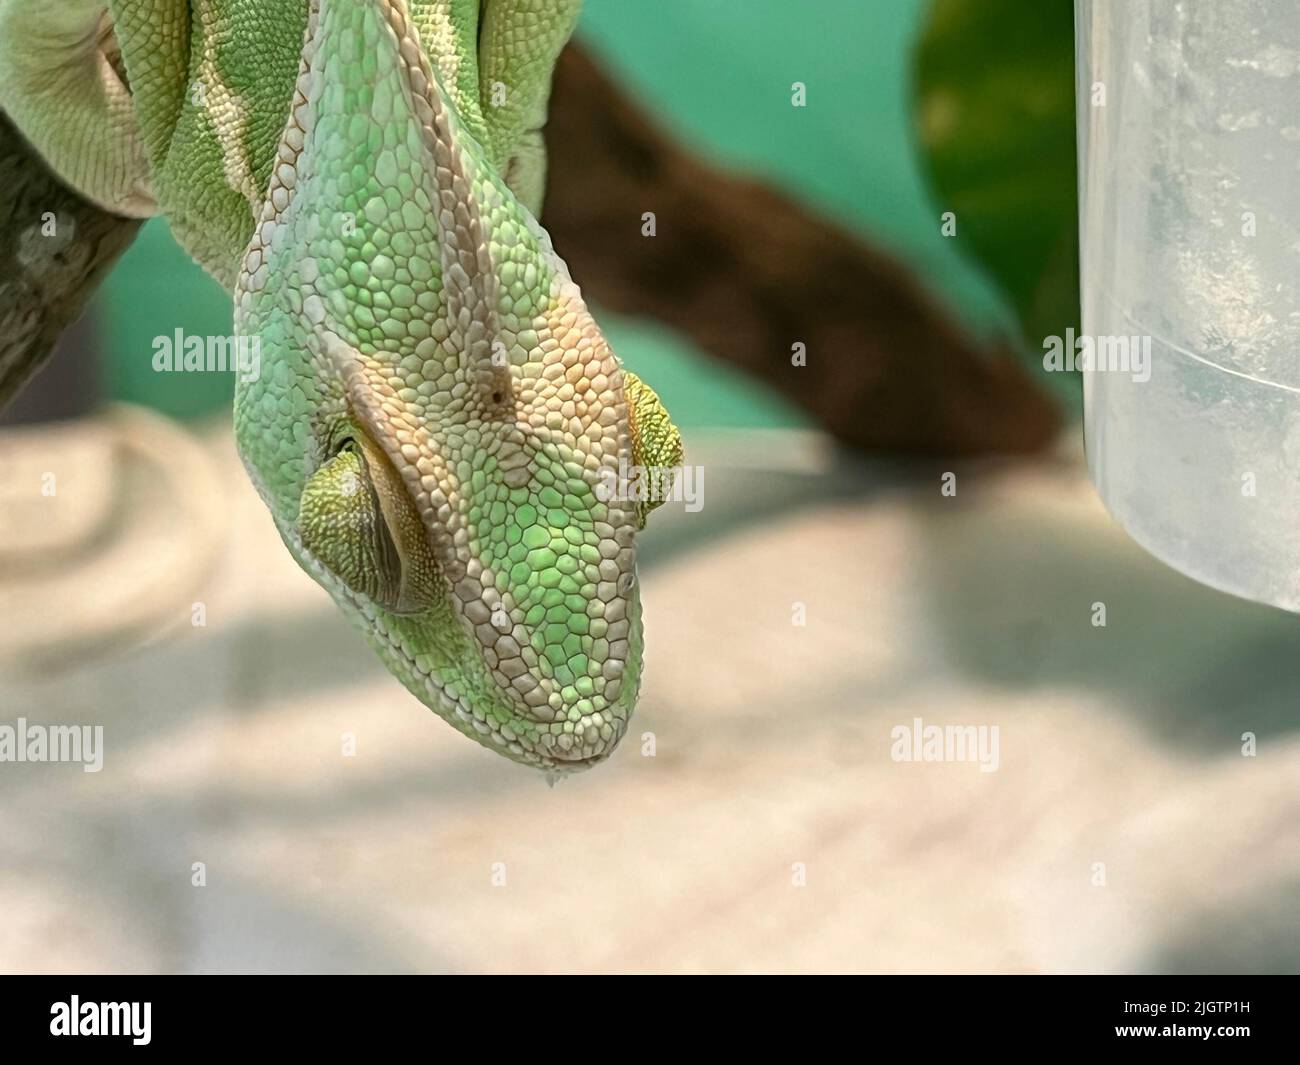 green chameleon watching something, staring the food, green lizard on a branch Stock Photo